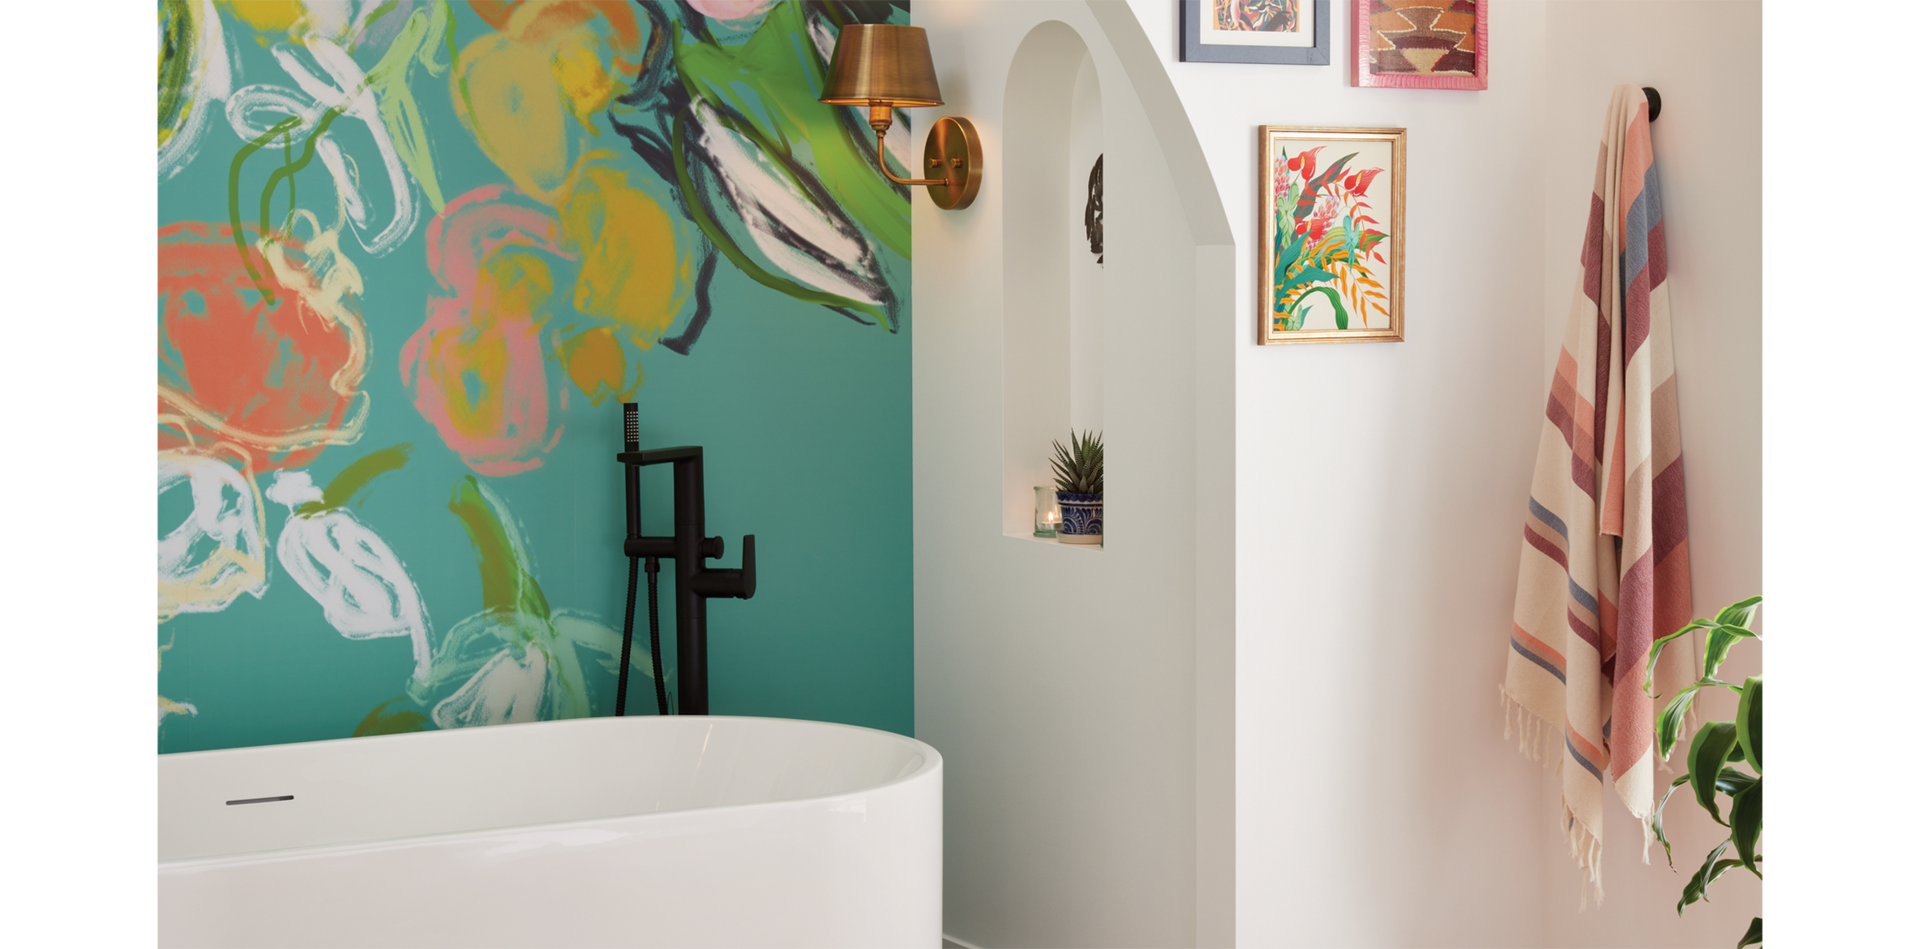 8 Small Bathroom Ideas That Will Help You Maximize Space